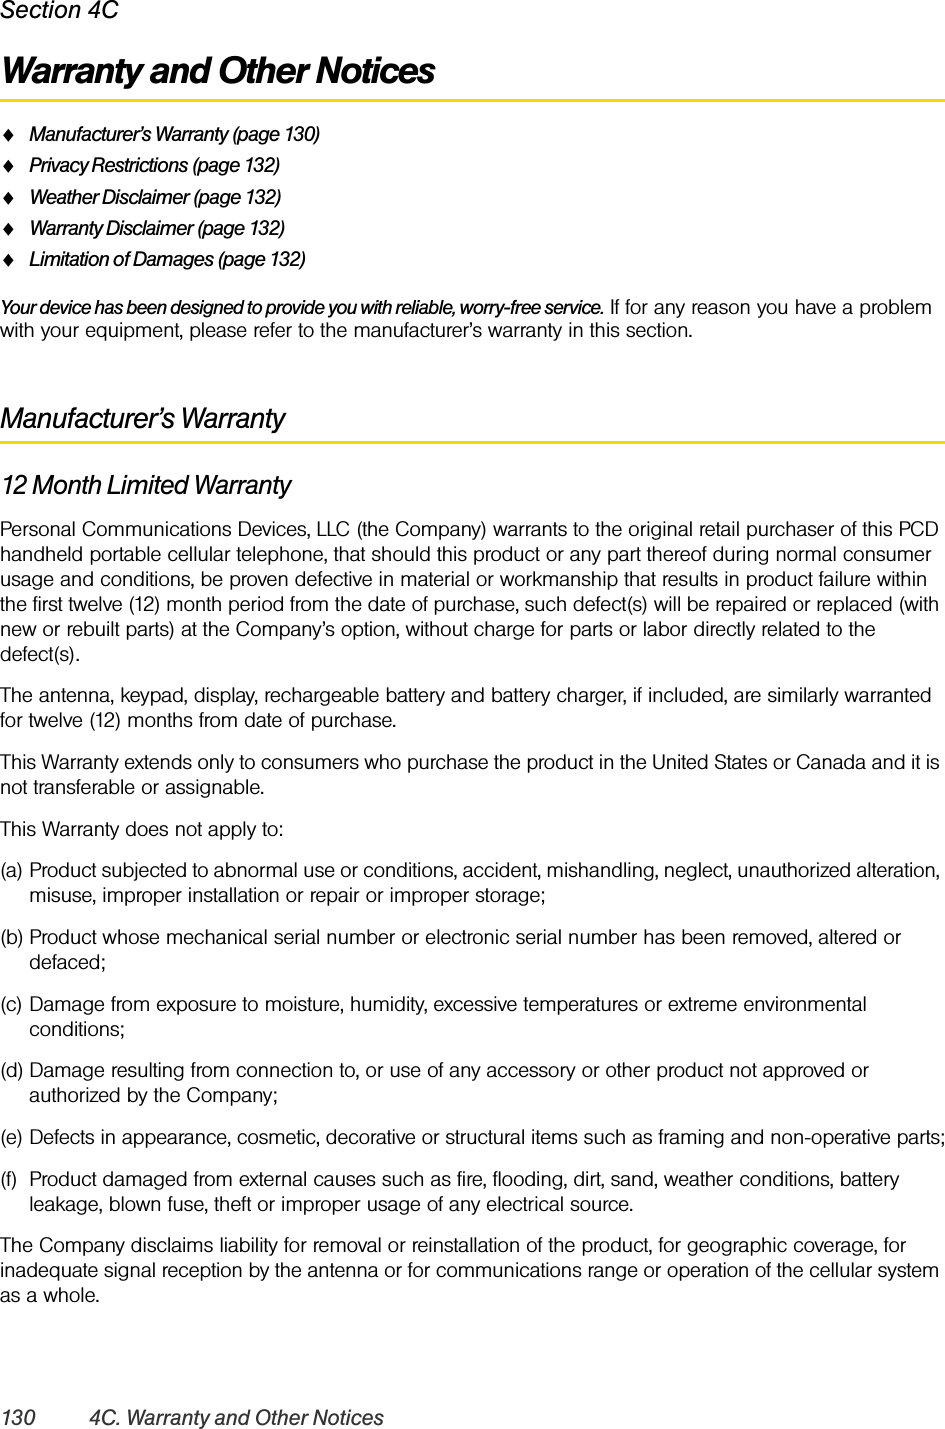 130 4C. Warranty and Other NoticesSection 4CWarranty and Other NoticesࡗManufacturer’s Warranty (page 130)ࡗPrivacy Restrictions (page 132)ࡗWeather Disclaimer (page 132)ࡗWarranty Disclaimer (page 132)ࡗLimitation of Damages (page 132)Your device has been designed to provide you with reliable, worry-free service. If for any reason you have a problem with your equipment, please refer to the manufacturer’s warranty in this section.Manufacturer’s Warranty12 Month Limited WarrantyPersonal Communications Devices, LLC (the Company) warrants to the original retail purchaser of this PCD handheld portable cellular telephone, that should this product or any part thereof during normal consumer usage and conditions, be proven defective in material or workmanship that results in product failure within the first twelve (12) month period from the date of purchase, such defect(s) will be repaired or replaced (with new or rebuilt parts) at the Company’s option, without charge for parts or labor directly related to the defect(s).The antenna, keypad, display, rechargeable battery and battery charger, if included, are similarly warranted for twelve (12) months from date of purchase.This Warranty extends only to consumers who purchase the product in the United States or Canada and it is not transferable or assignable.This Warranty does not apply to:(a) Product subjected to abnormal use or conditions, accident, mishandling, neglect, unauthorized alteration, misuse, improper installation or repair or improper storage;(b) Product whose mechanical serial number or electronic serial number has been removed, altered or defaced;(c) Damage from exposure to moisture, humidity, excessive temperatures or extreme environmental conditions;(d) Damage resulting from connection to, or use of any accessory or other product not approved or authorized by the Company;(e) Defects in appearance, cosmetic, decorative or structural items such as framing and non-operative parts;(f) Product damaged from external causes such as fire, flooding, dirt, sand, weather conditions, battery leakage, blown fuse, theft or improper usage of any electrical source.The Company disclaims liability for removal or reinstallation of the product, for geographic coverage, for inadequate signal reception by the antenna or for communications range or operation of the cellular system as a whole.